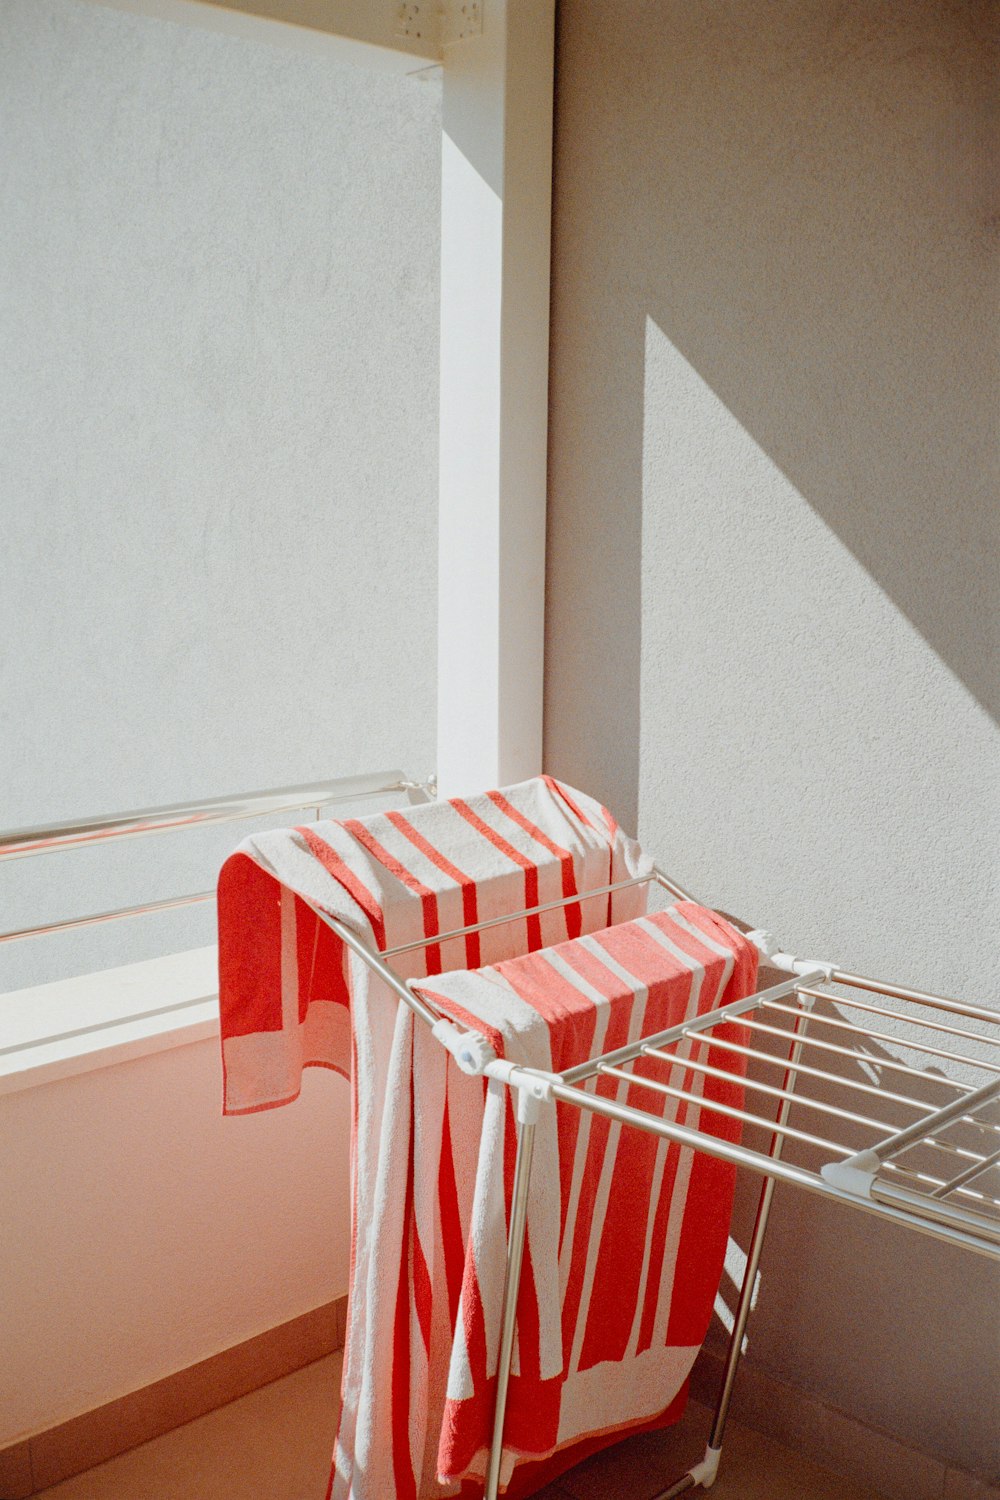 two red and white striped towels are on a wire rack